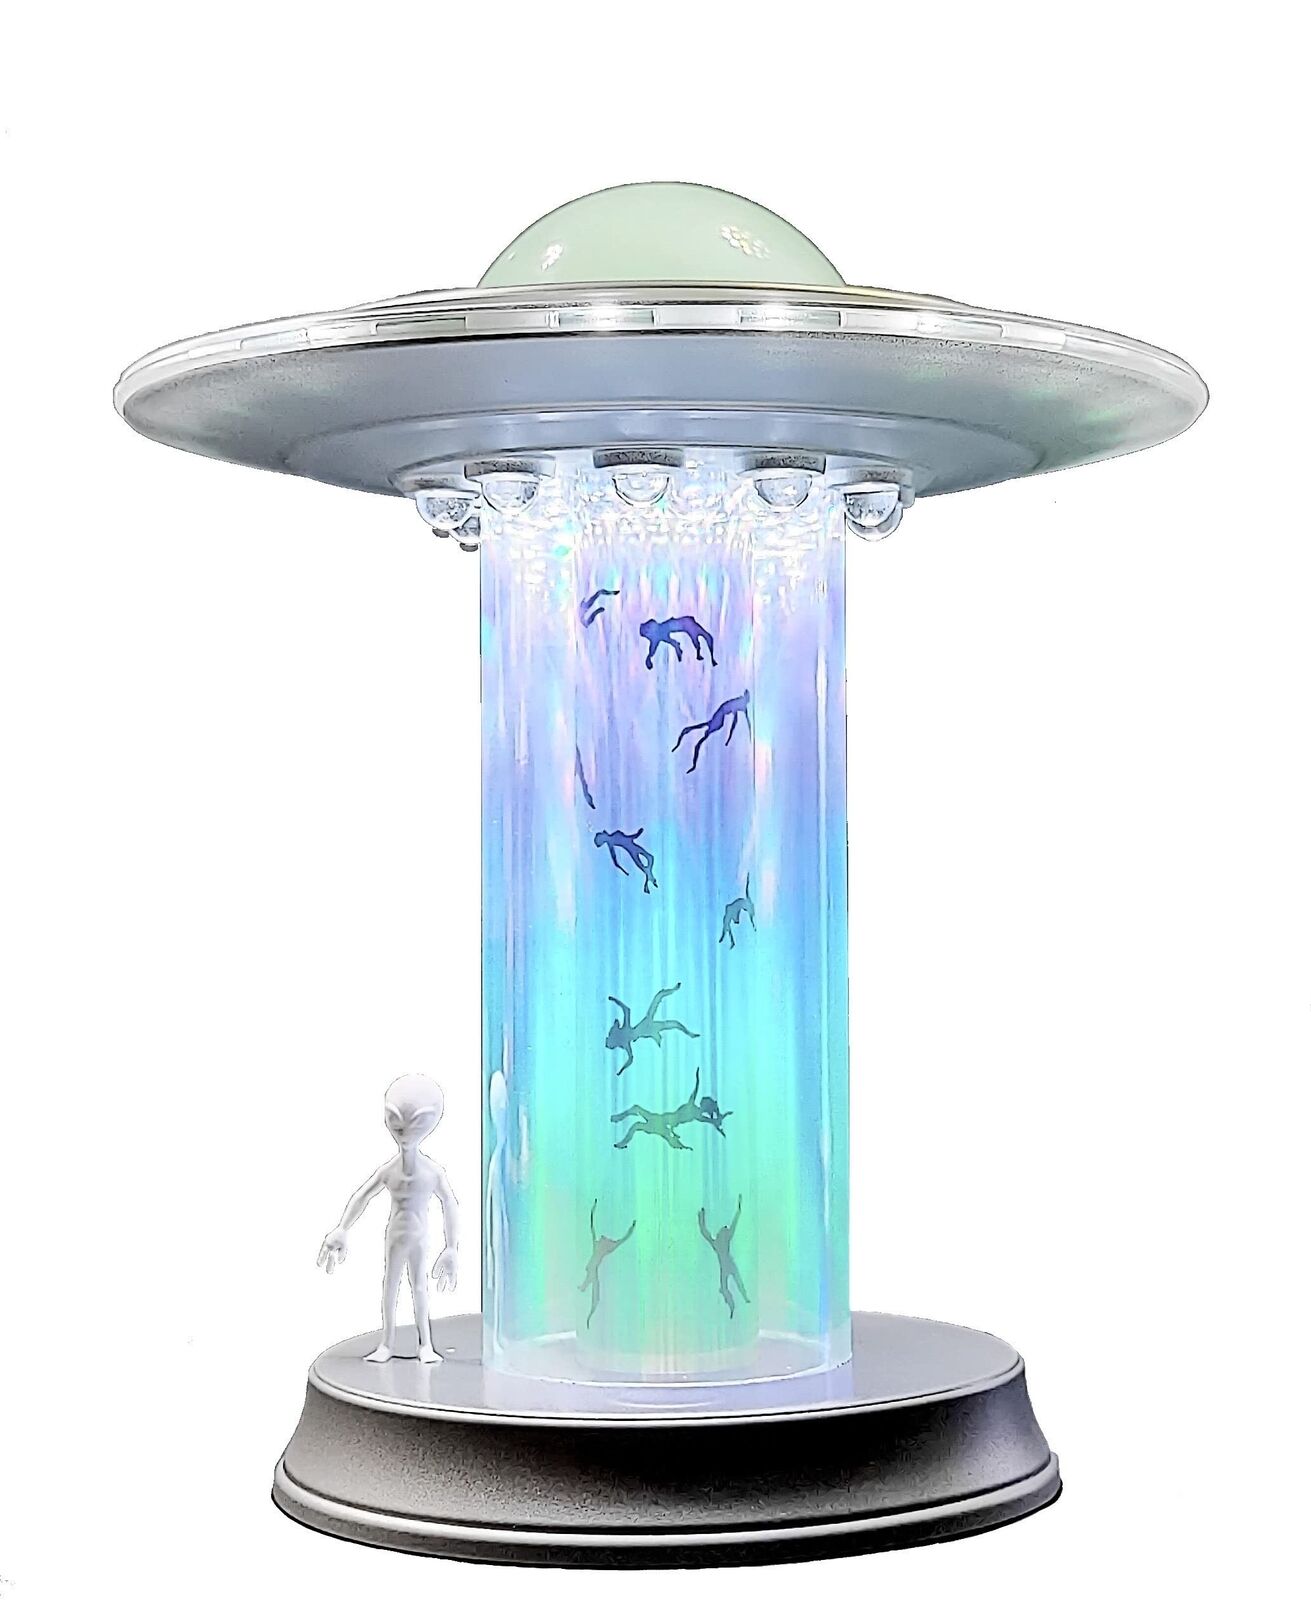 UFO Model Human Abduction Touch Table Lamp LED Alien Encounter Decoration Are...